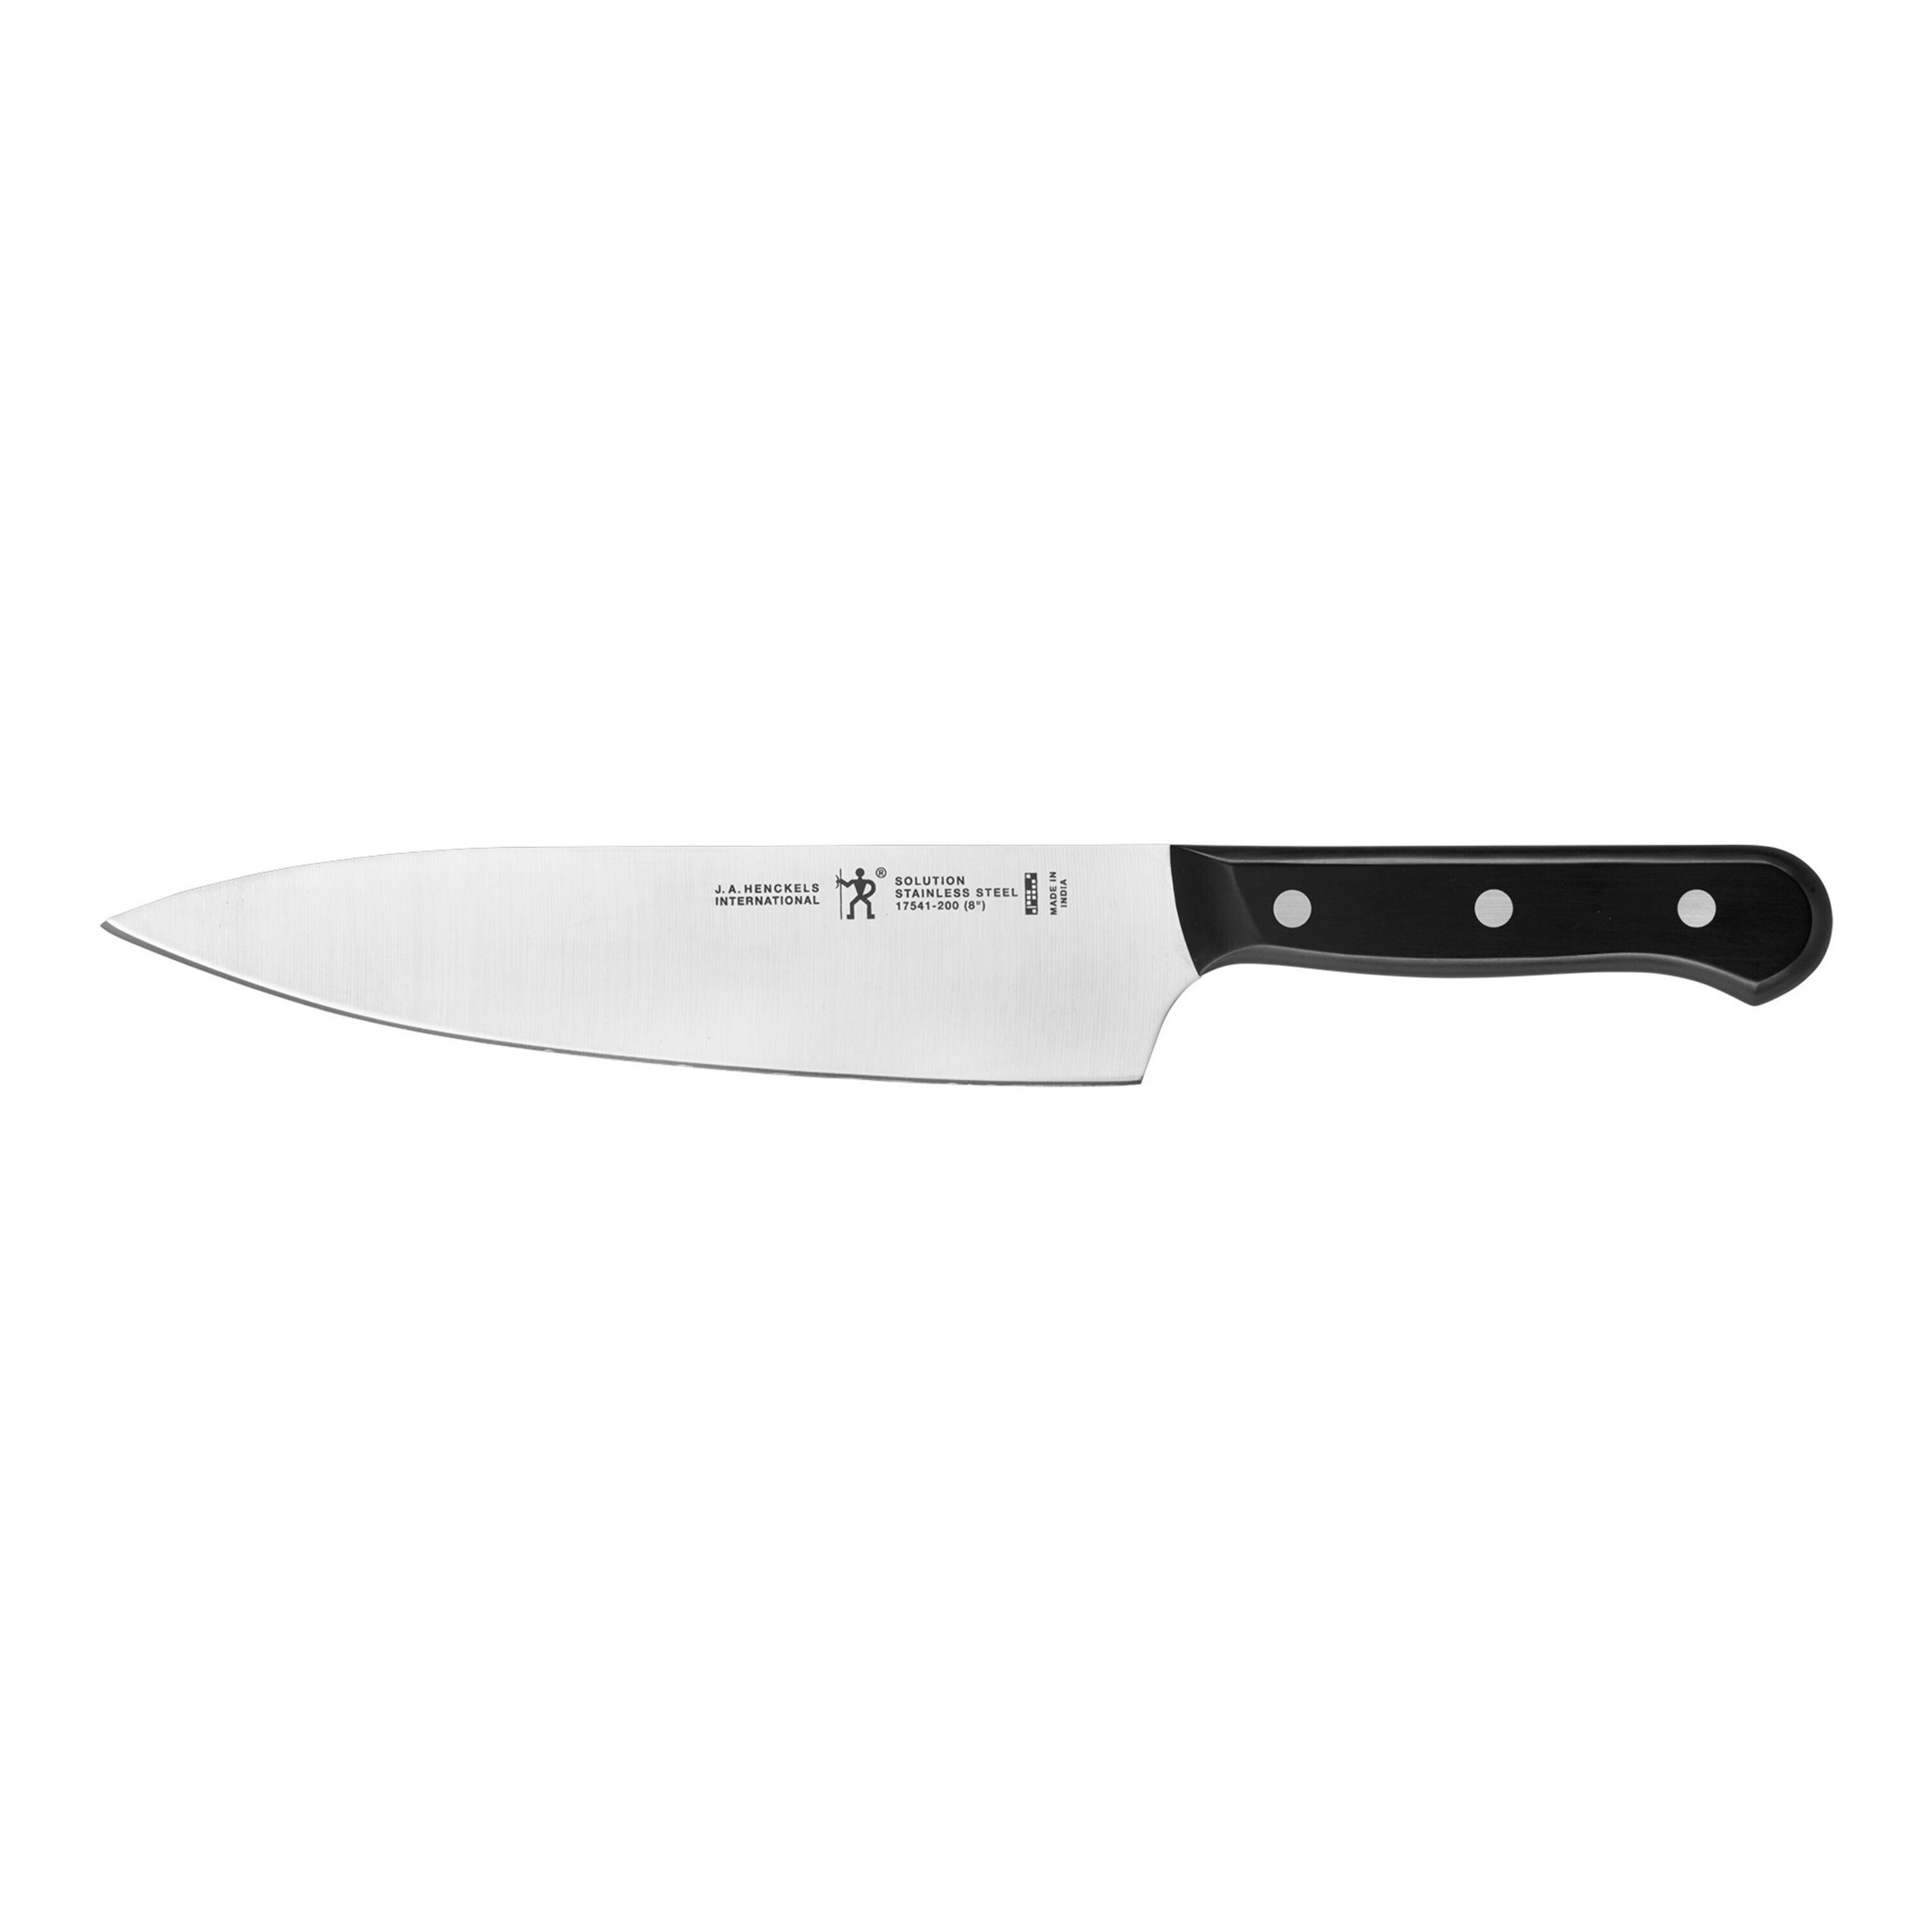  ZWILLING Gourmet 8-inch Chef's Knife, Kitchen Knife, Black,  Stainless Steel: Home & Kitchen